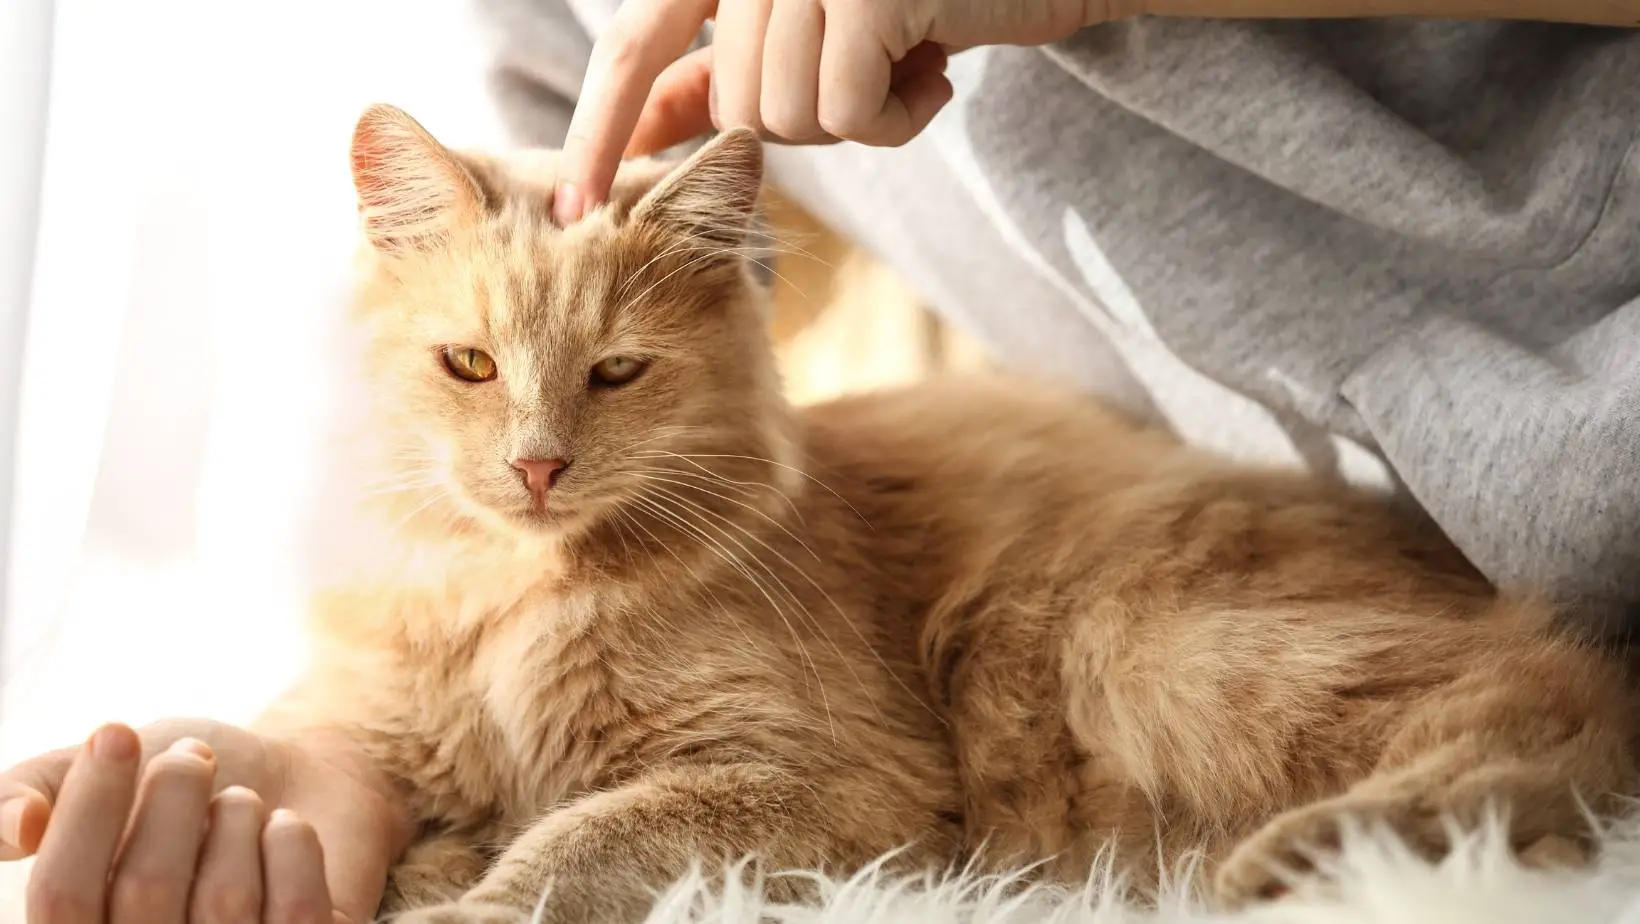 Can Cats Give You Ringworm?